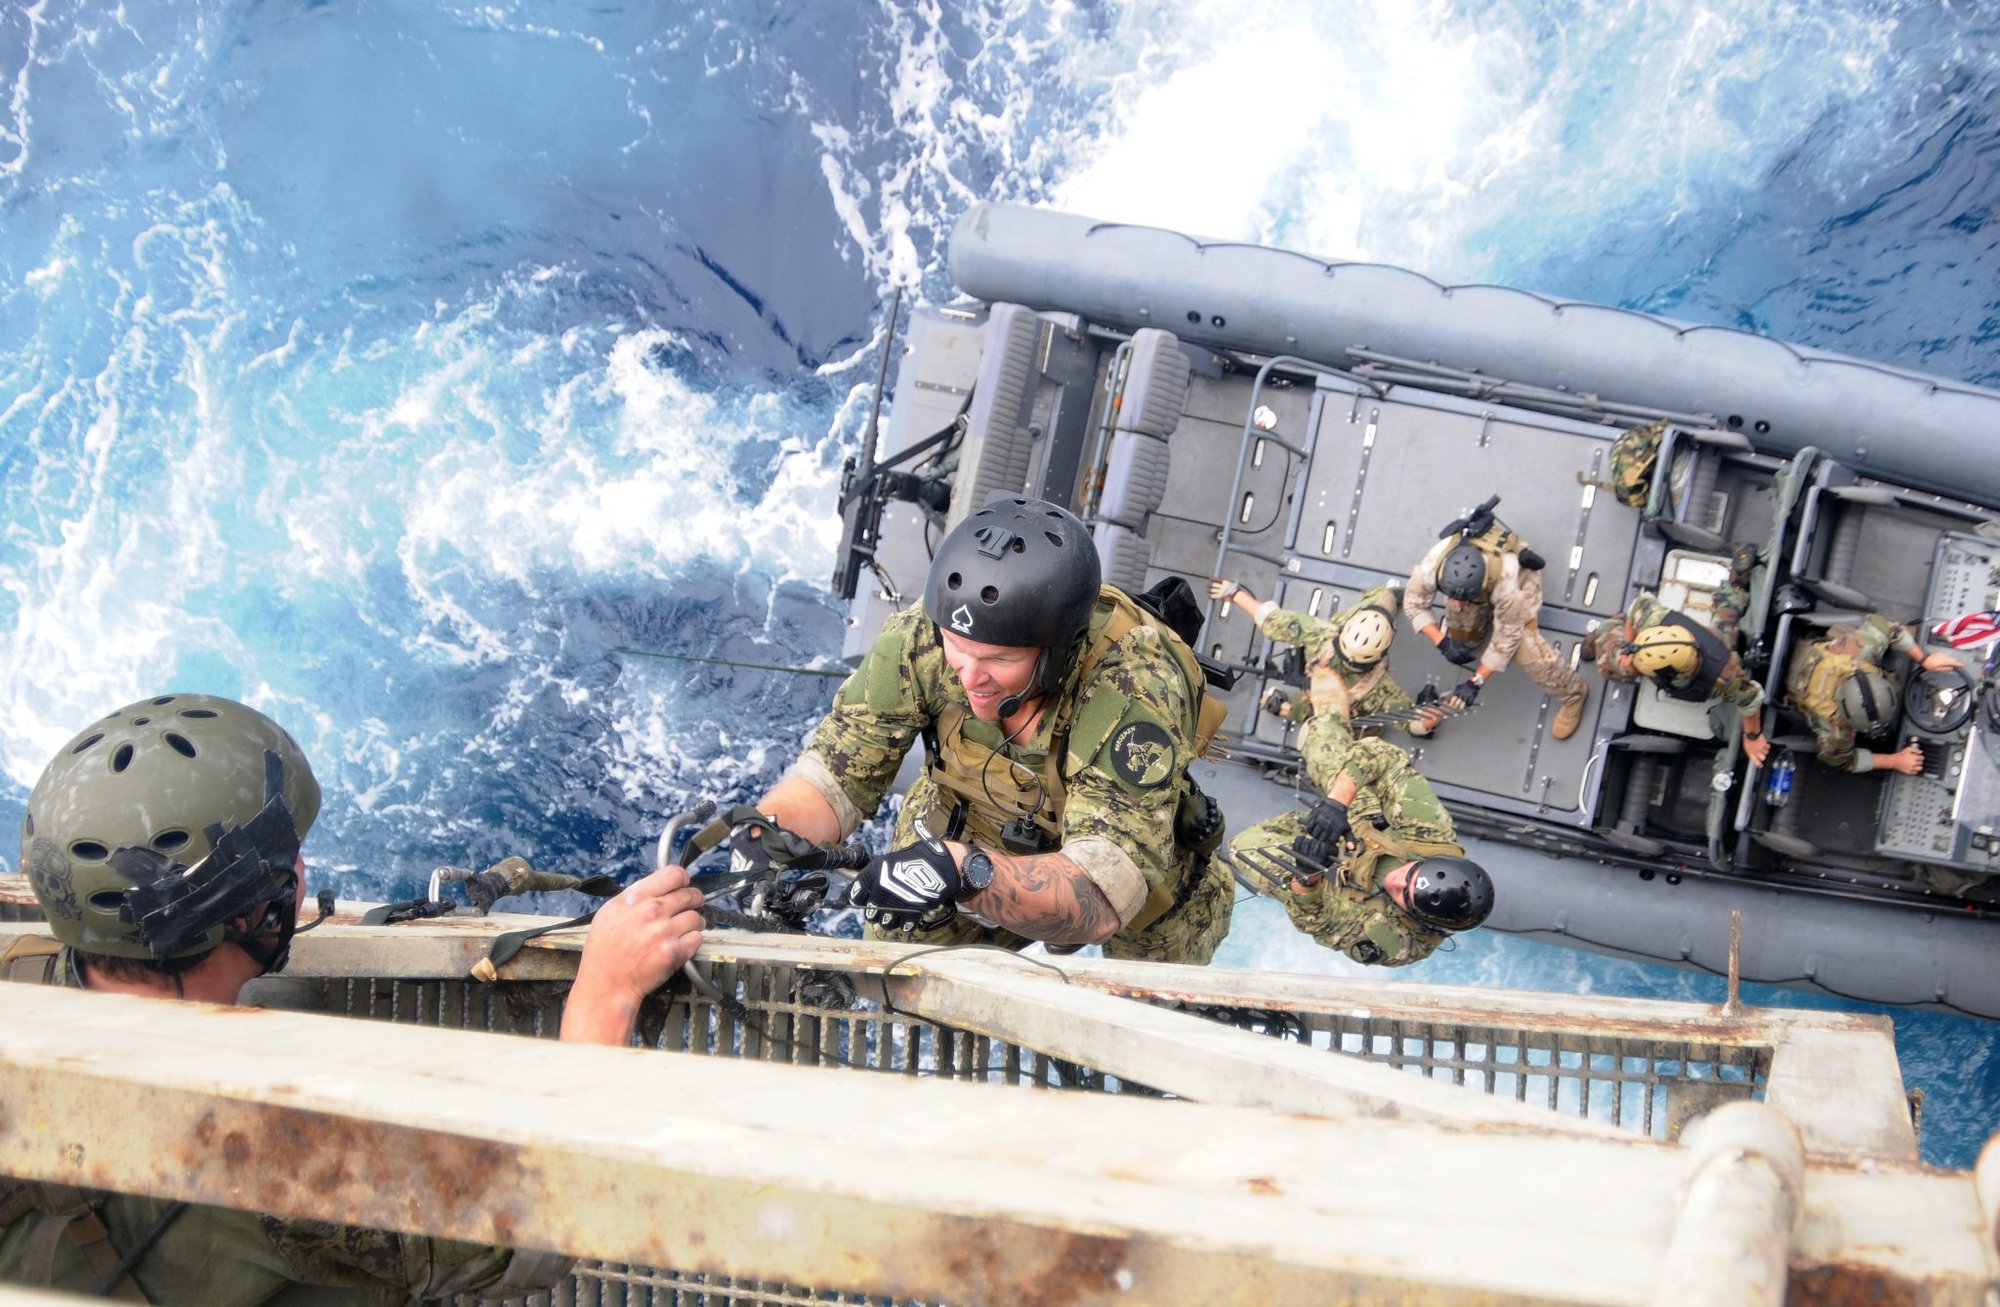 U.S. Navy SEALs train with Special Boat Team 12 on the proper techniques of how to board gas and oil platforms during the SEALs gas and oil platform training cycle. SEALs conduct these evolutions to hone their various maritime operations skills.